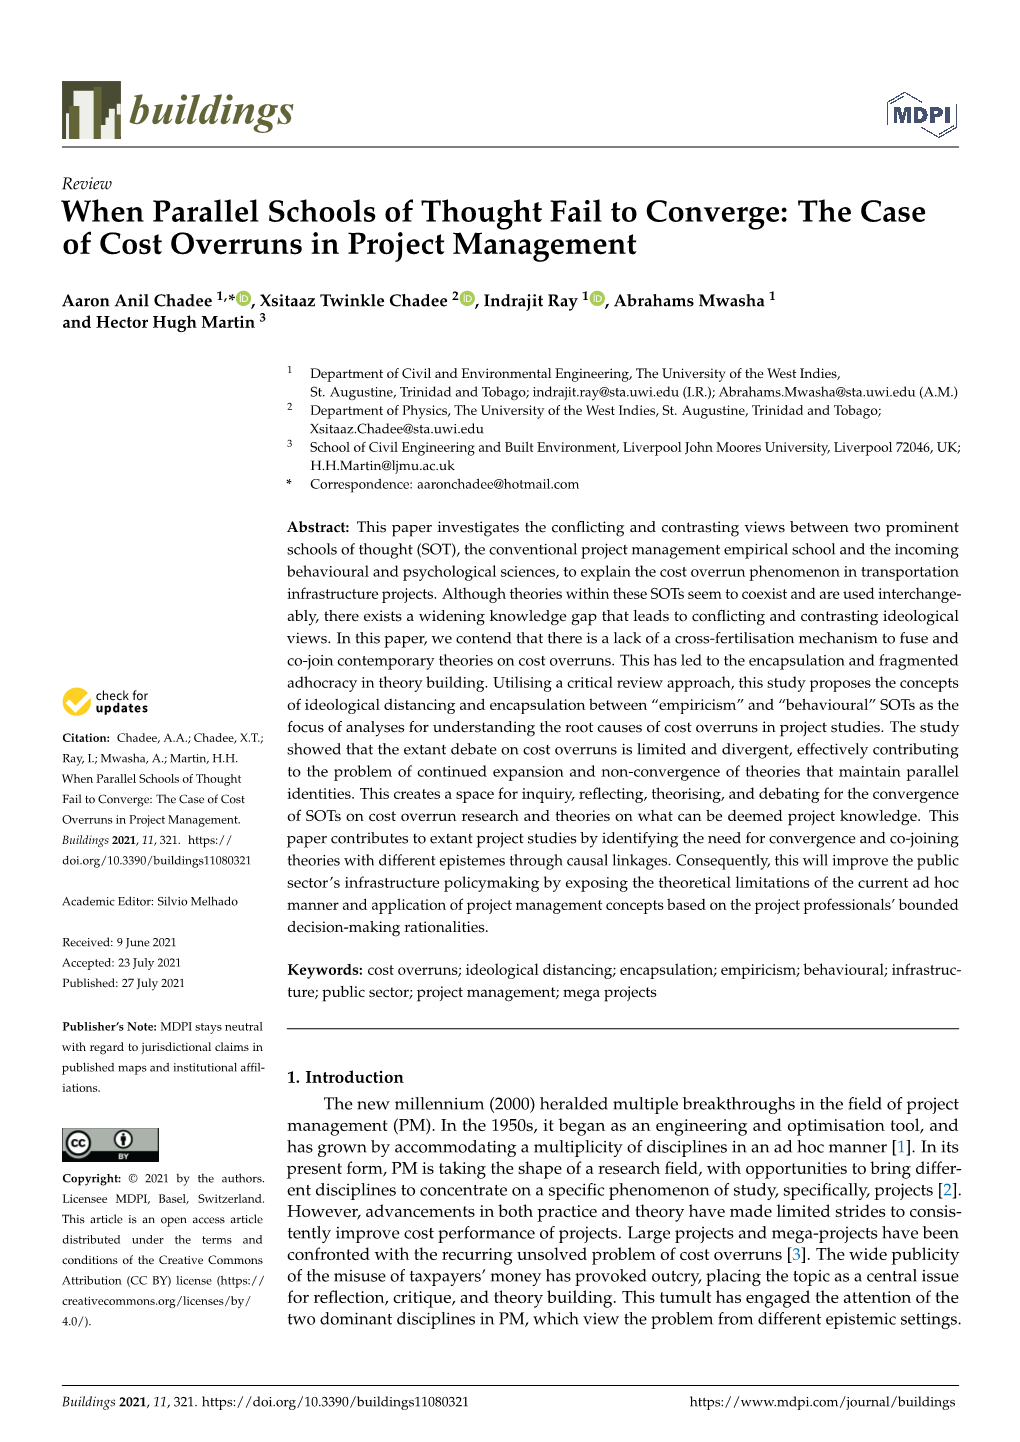 The Case of Cost Overruns in Project Management